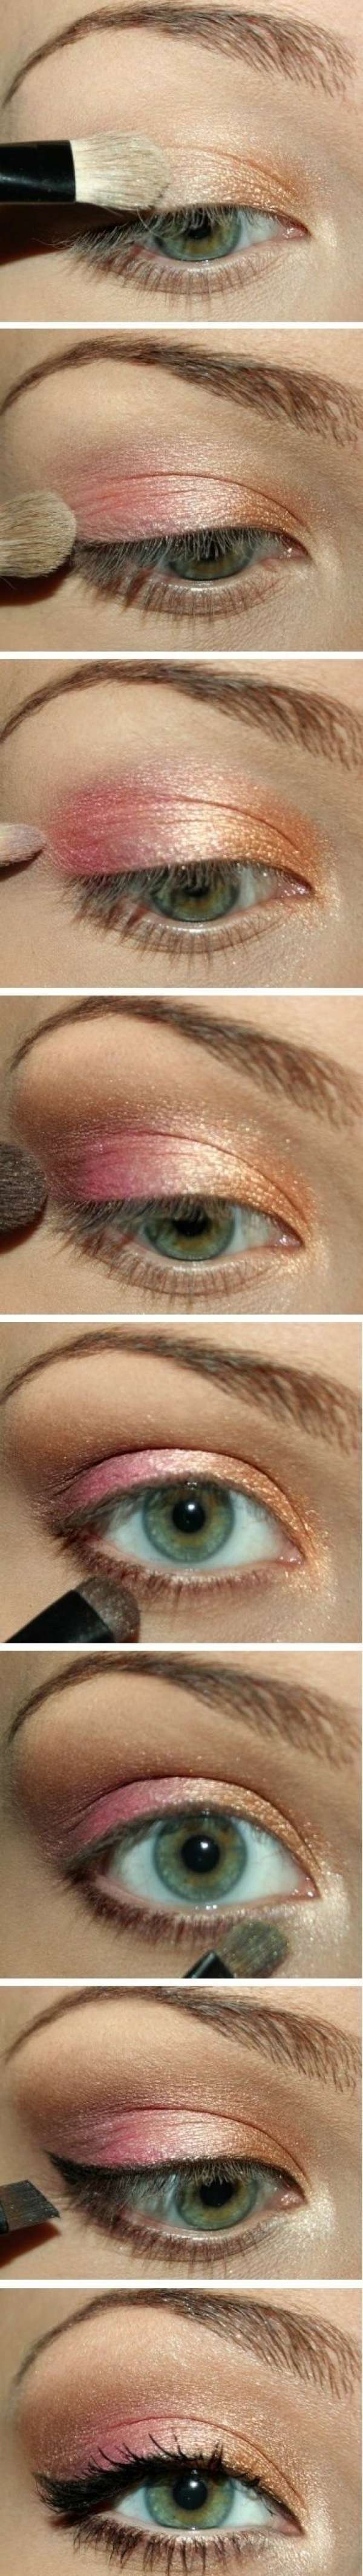 Maquillage rose pêche